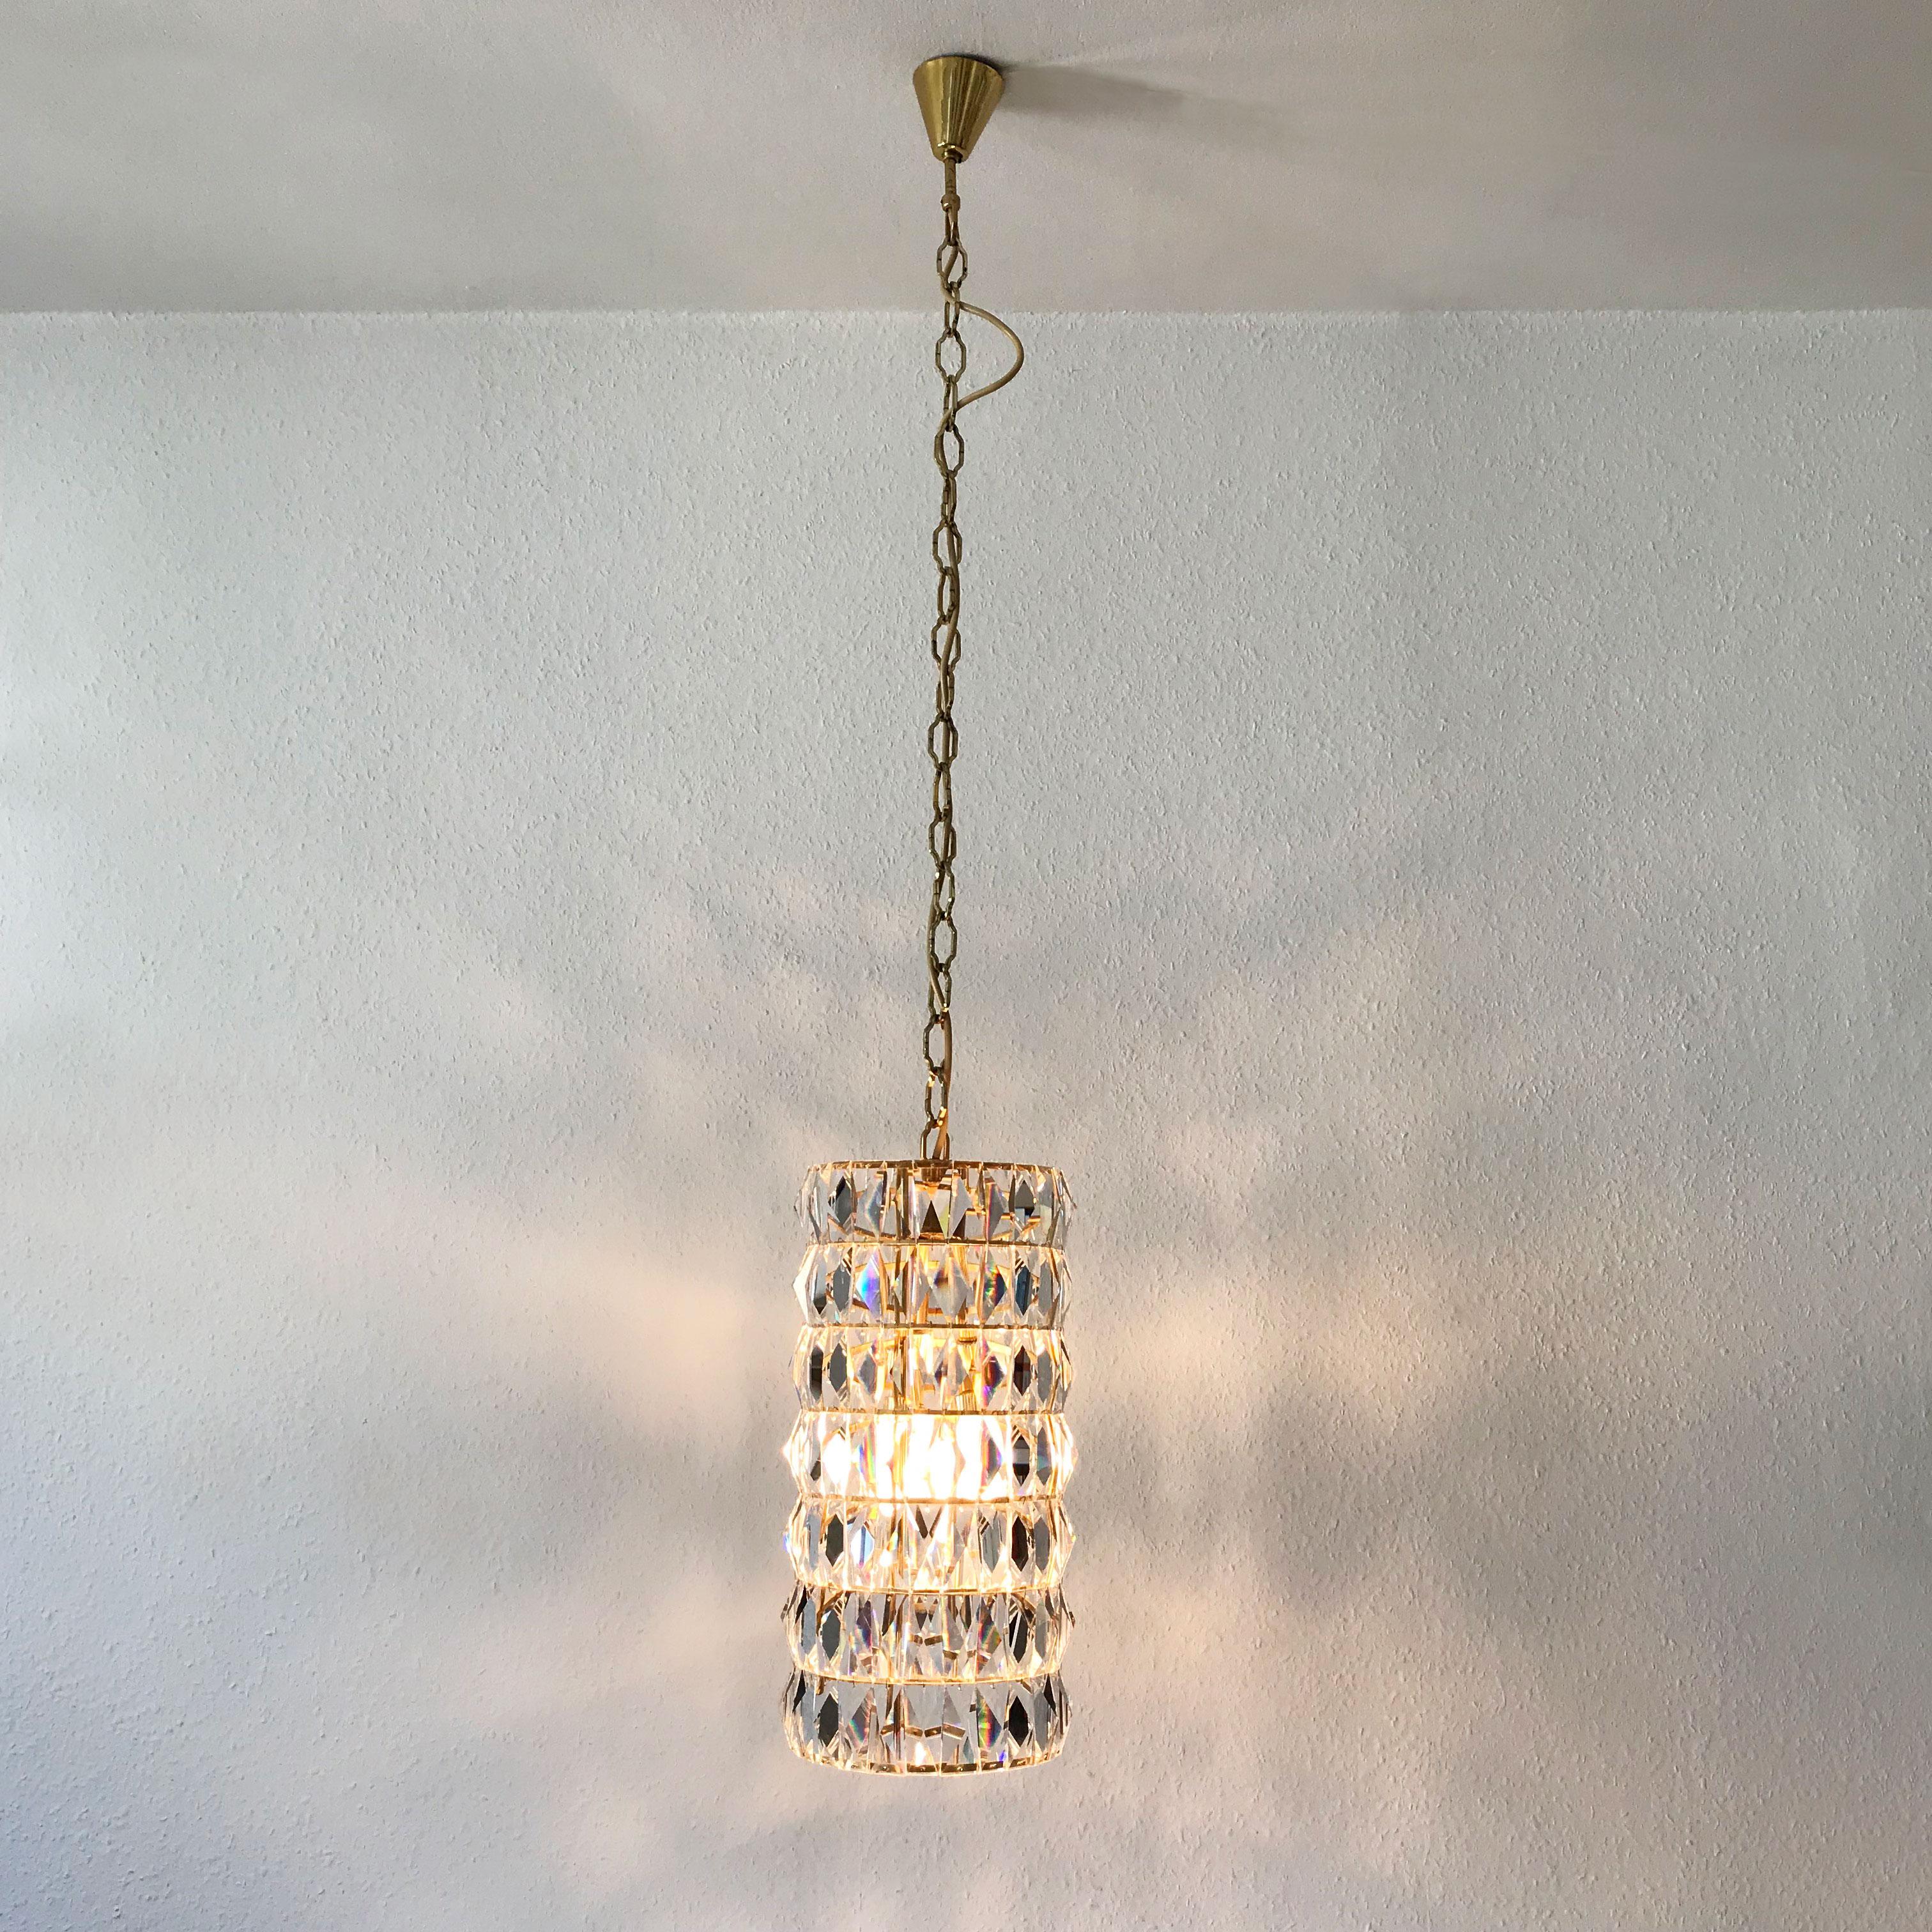 Exceptional Mid-Century Modern pendant lamp or chandelier. Manufactured by Bakalowits & Söhne, Vienna, Austria in 1960s. 

Executed in facet cut crystal glass and gilt brass, the chandelier needs 3 x E14 / E12 Edison screw fit bulbs. It is wired, in